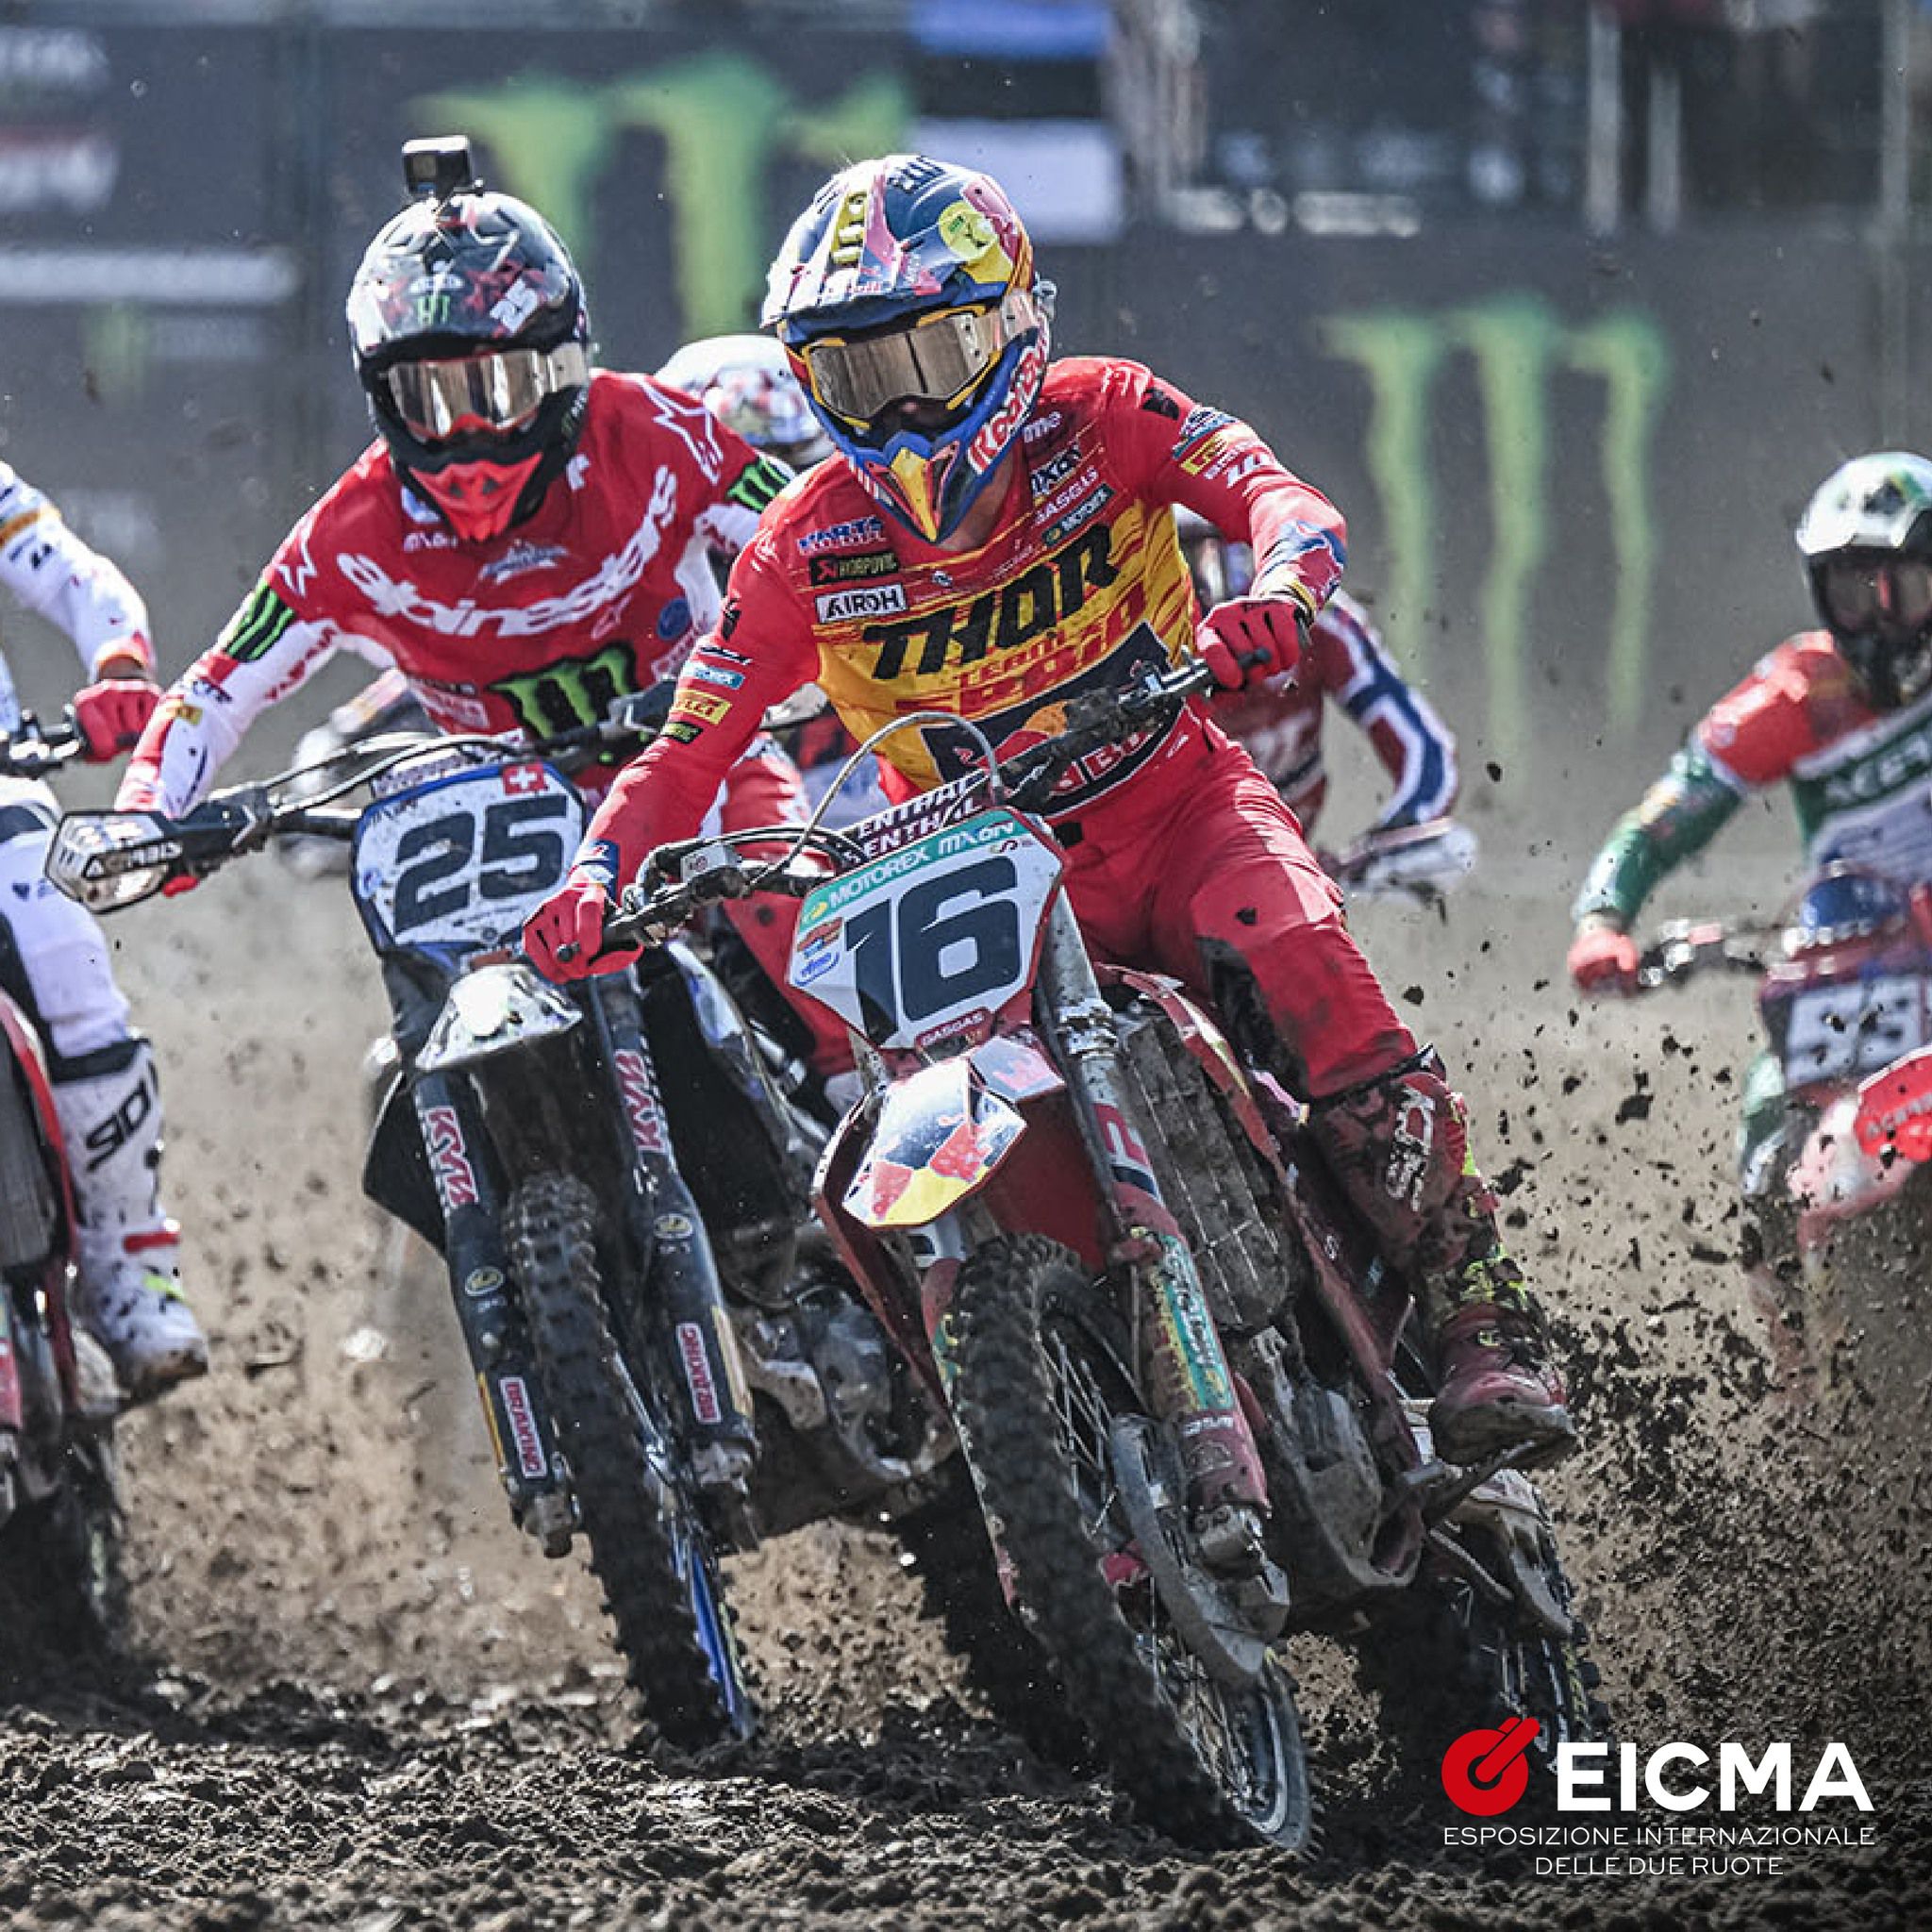 Racing is a part of EICMA, too. Courtesy EICMA